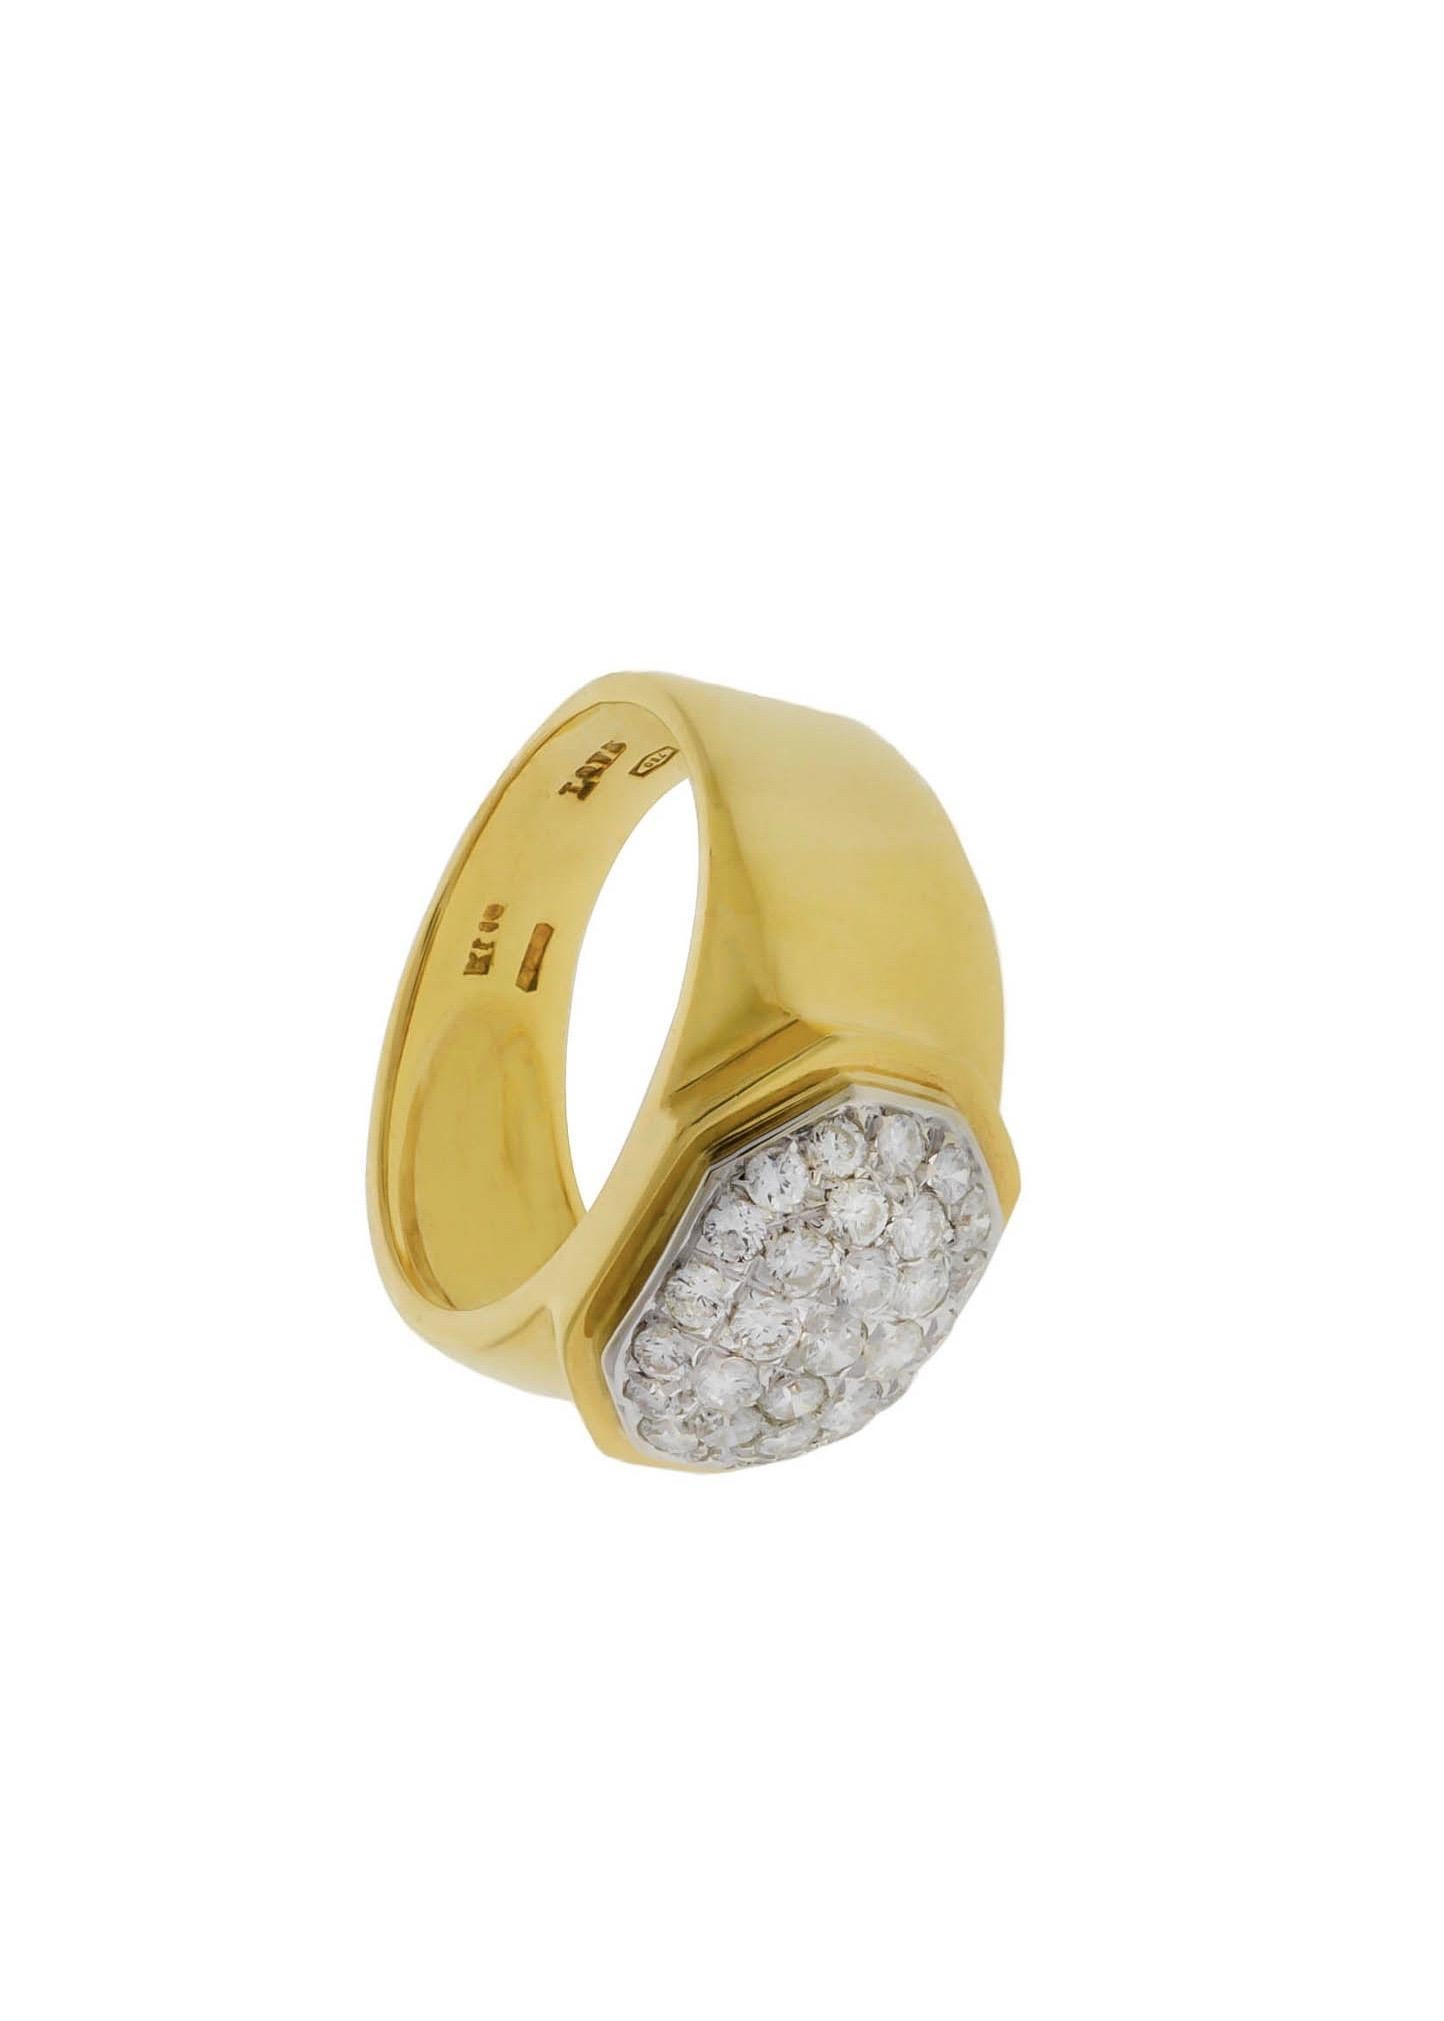 18K ring containing 0.71 carat in pave set round diamonds. The diamonds are set in a cluster hexagonal pattern surrounded by a bezel.
This ring also looks great as a pinky ring.
Size 6.5
Can be sized